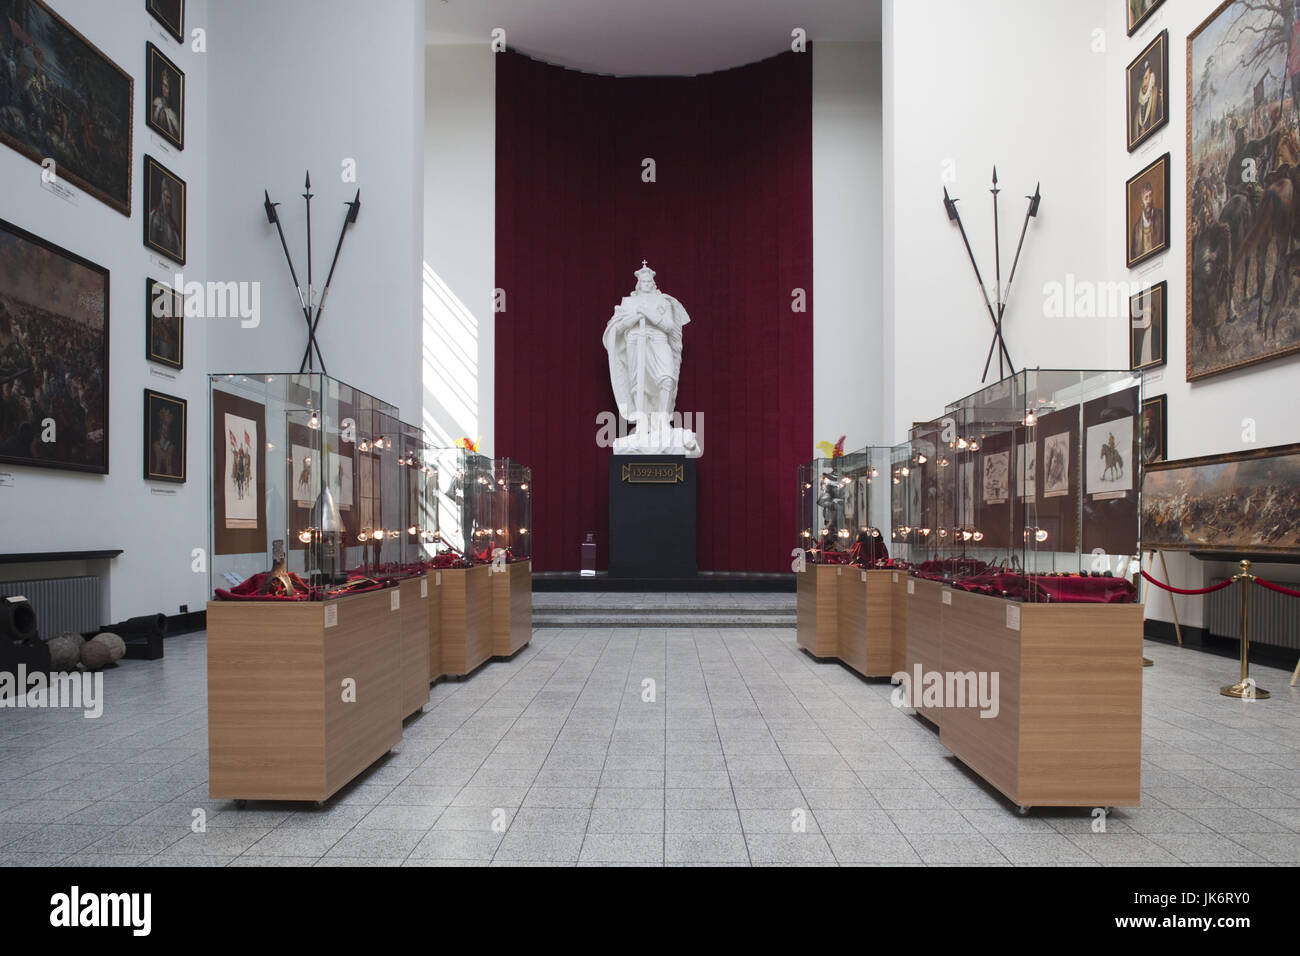 Lithuania, Central Lithuania, Kaunas, Unity Square, Military Museum of Vytautas the Great, interior Stock Photo